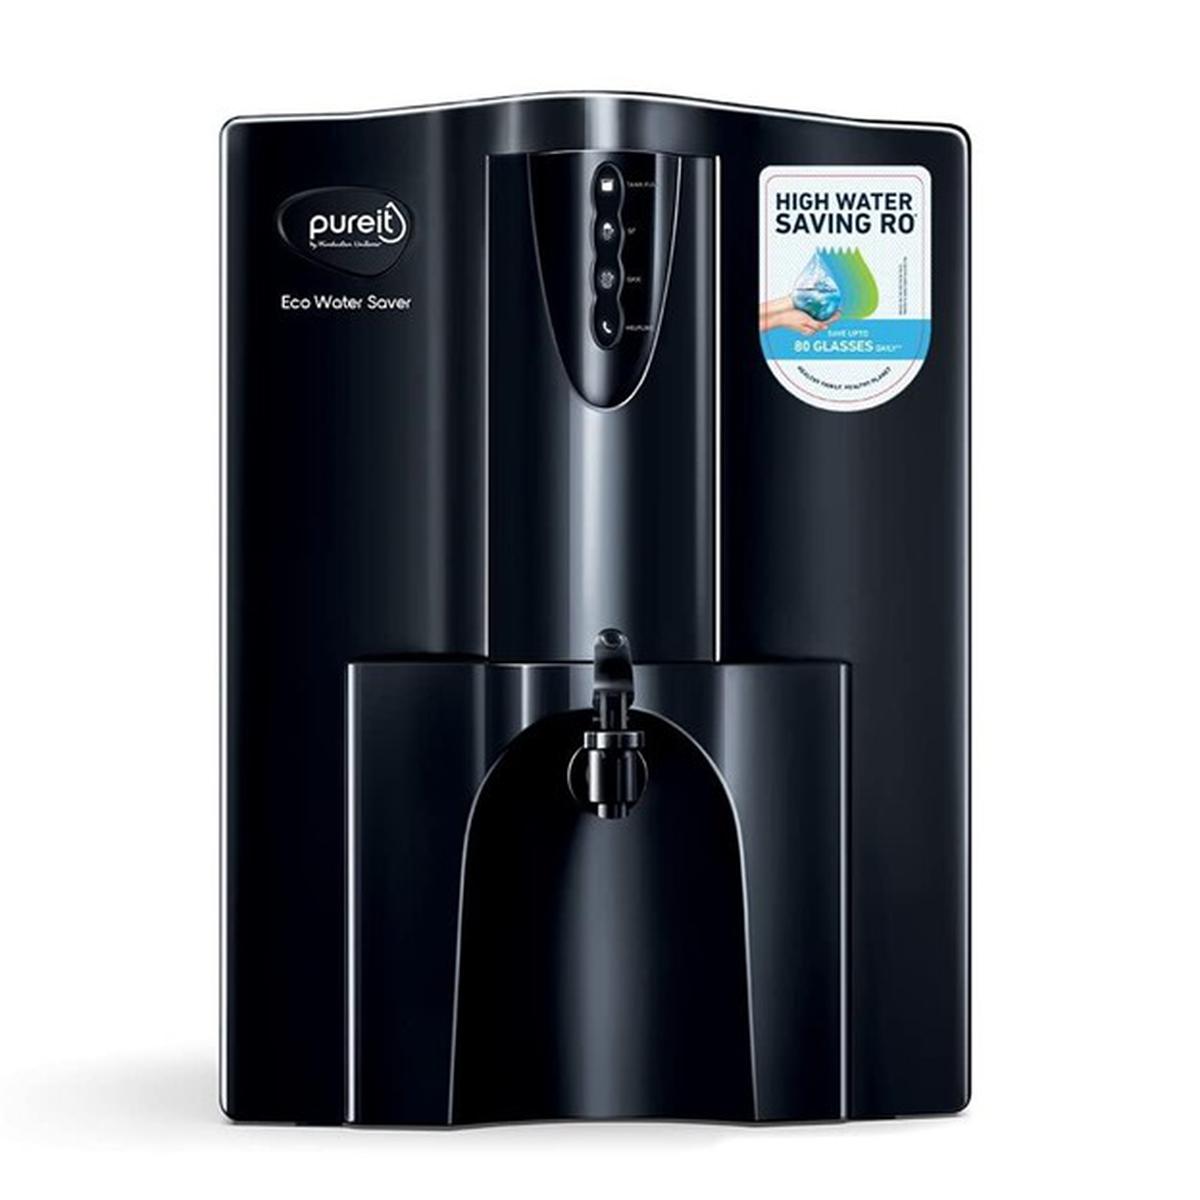 Water Purifier: Buy Water Purifiers & Filters at Best Price Online in India  - KENT